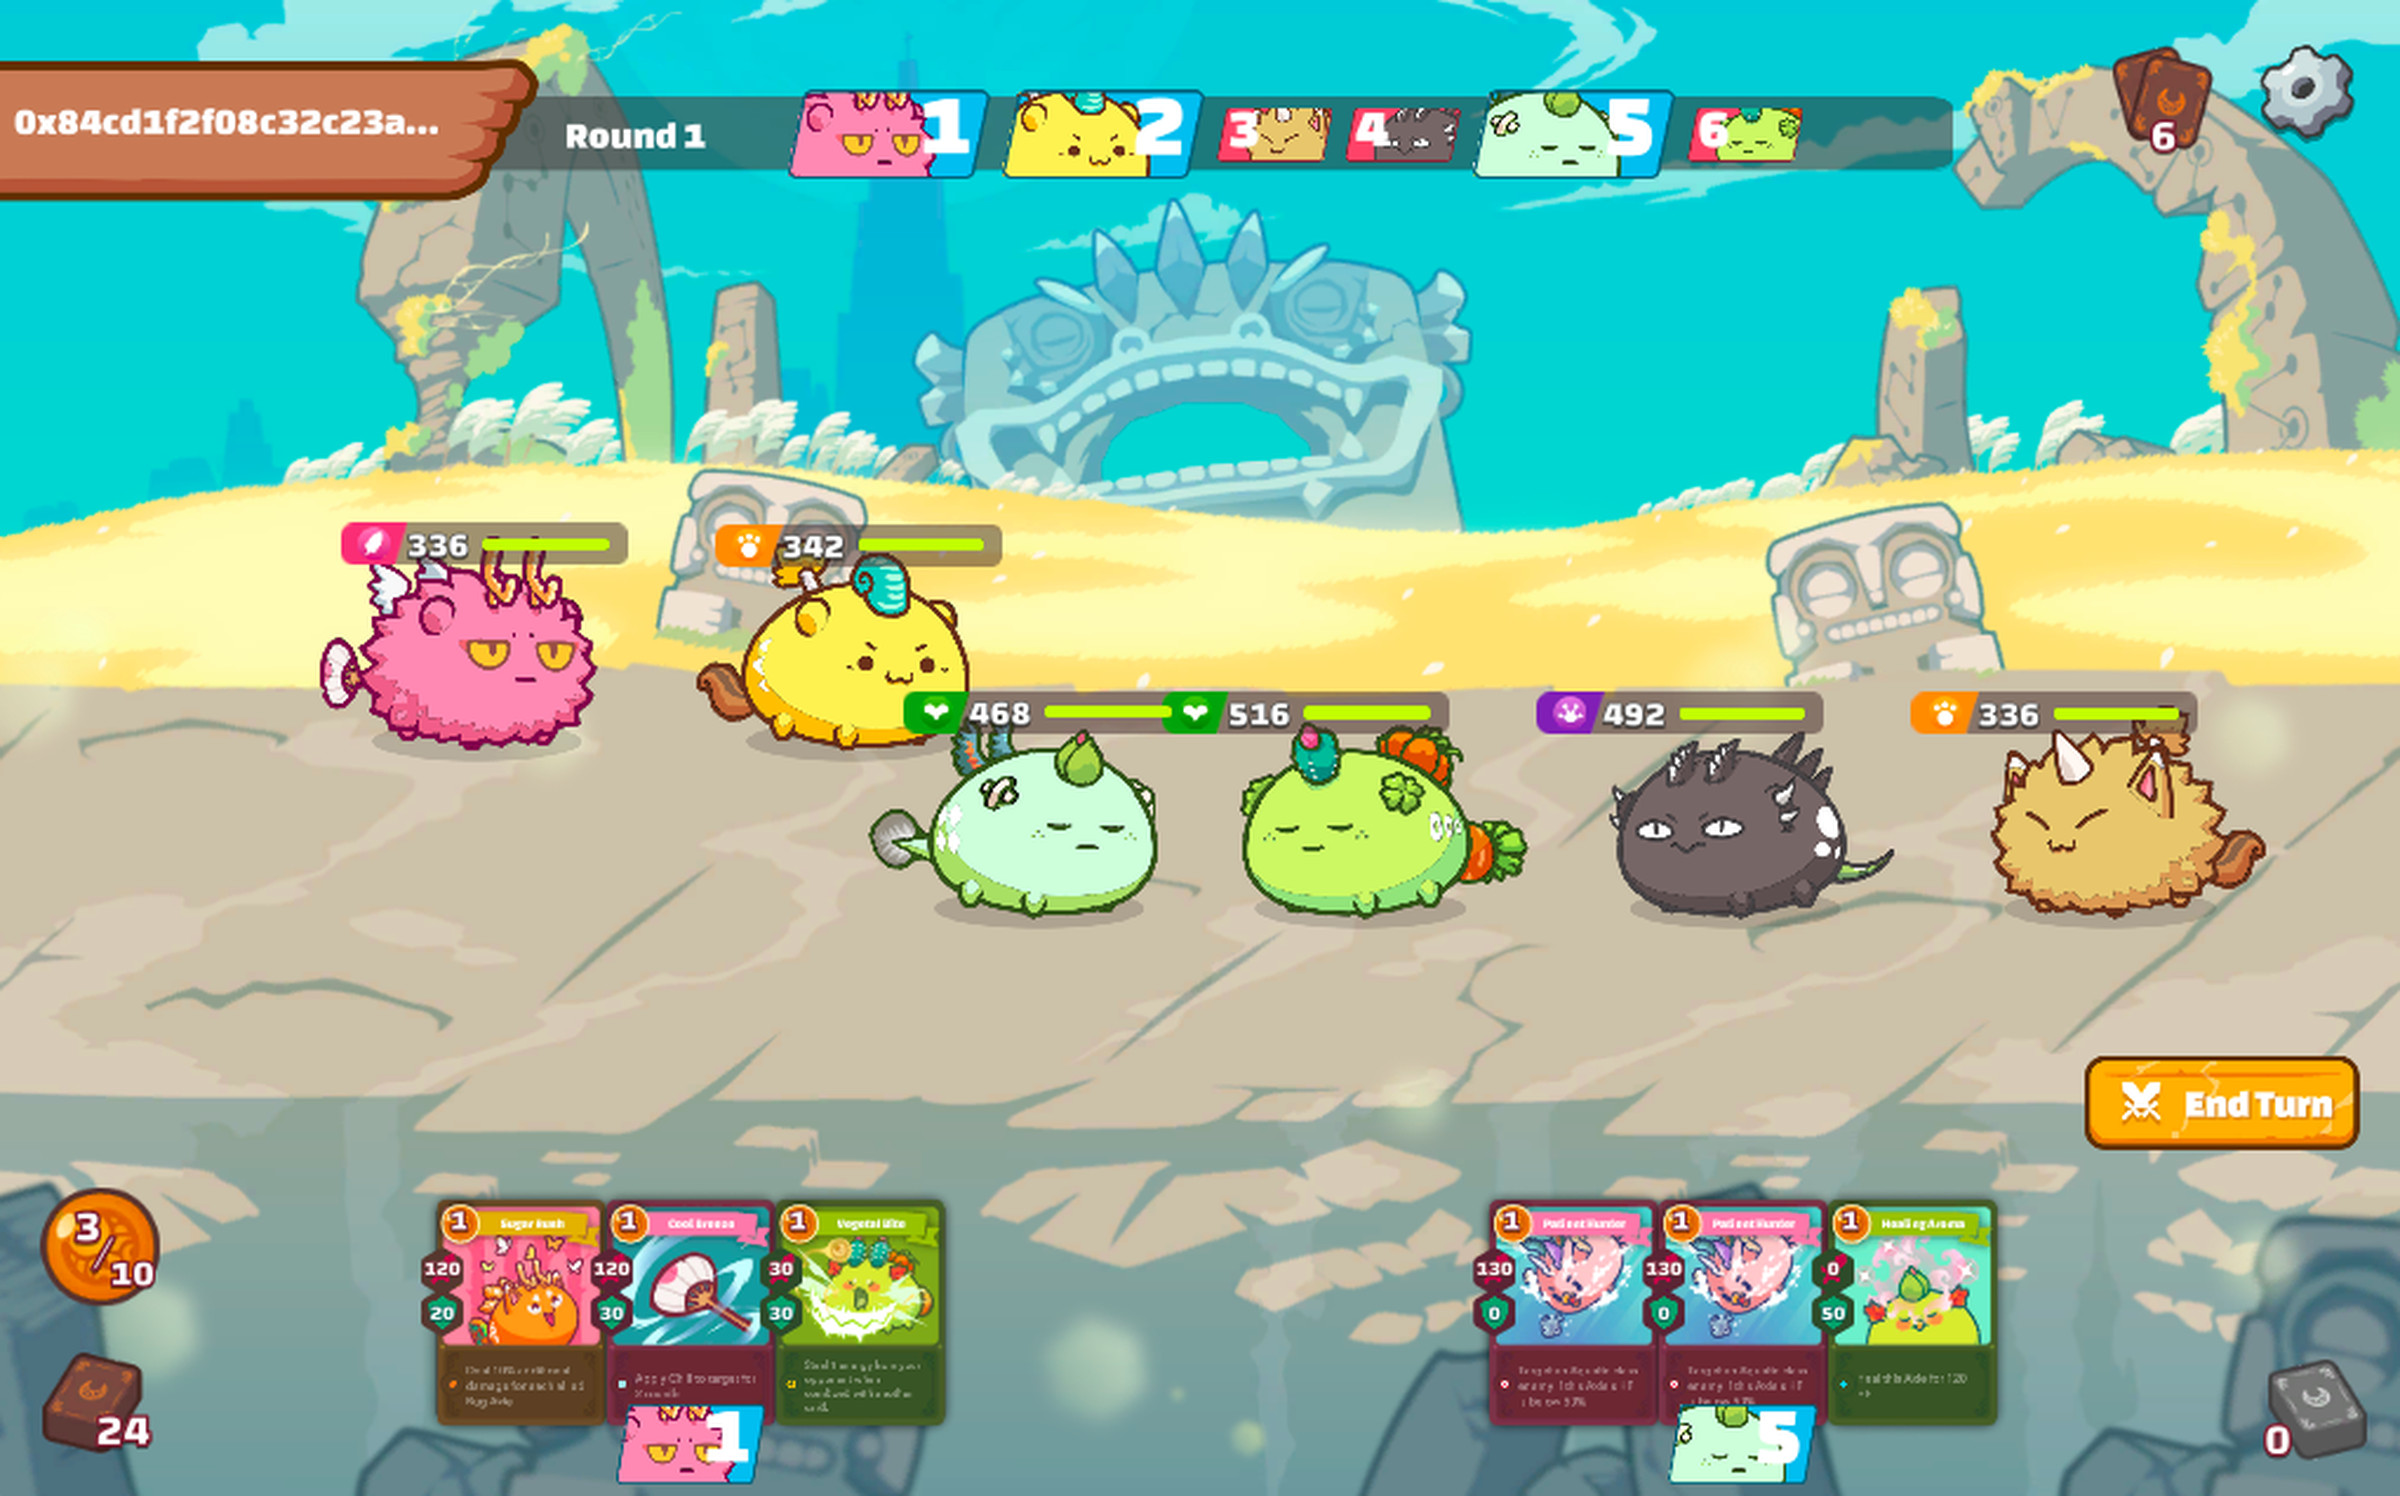 A player-versus-player match in Axie Infinity.